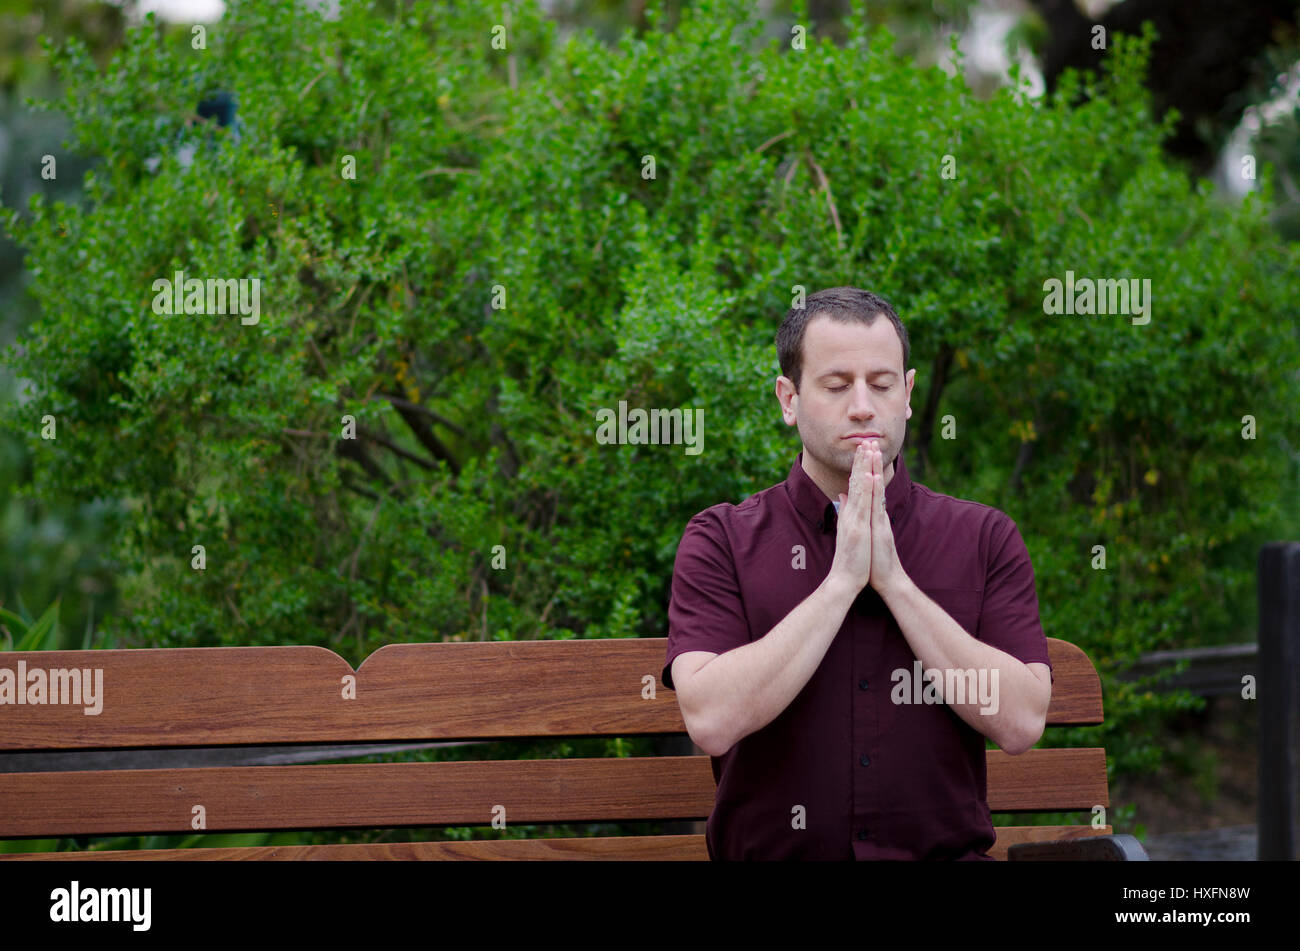 Man praying with hands together on a bench outside. Stock Photo